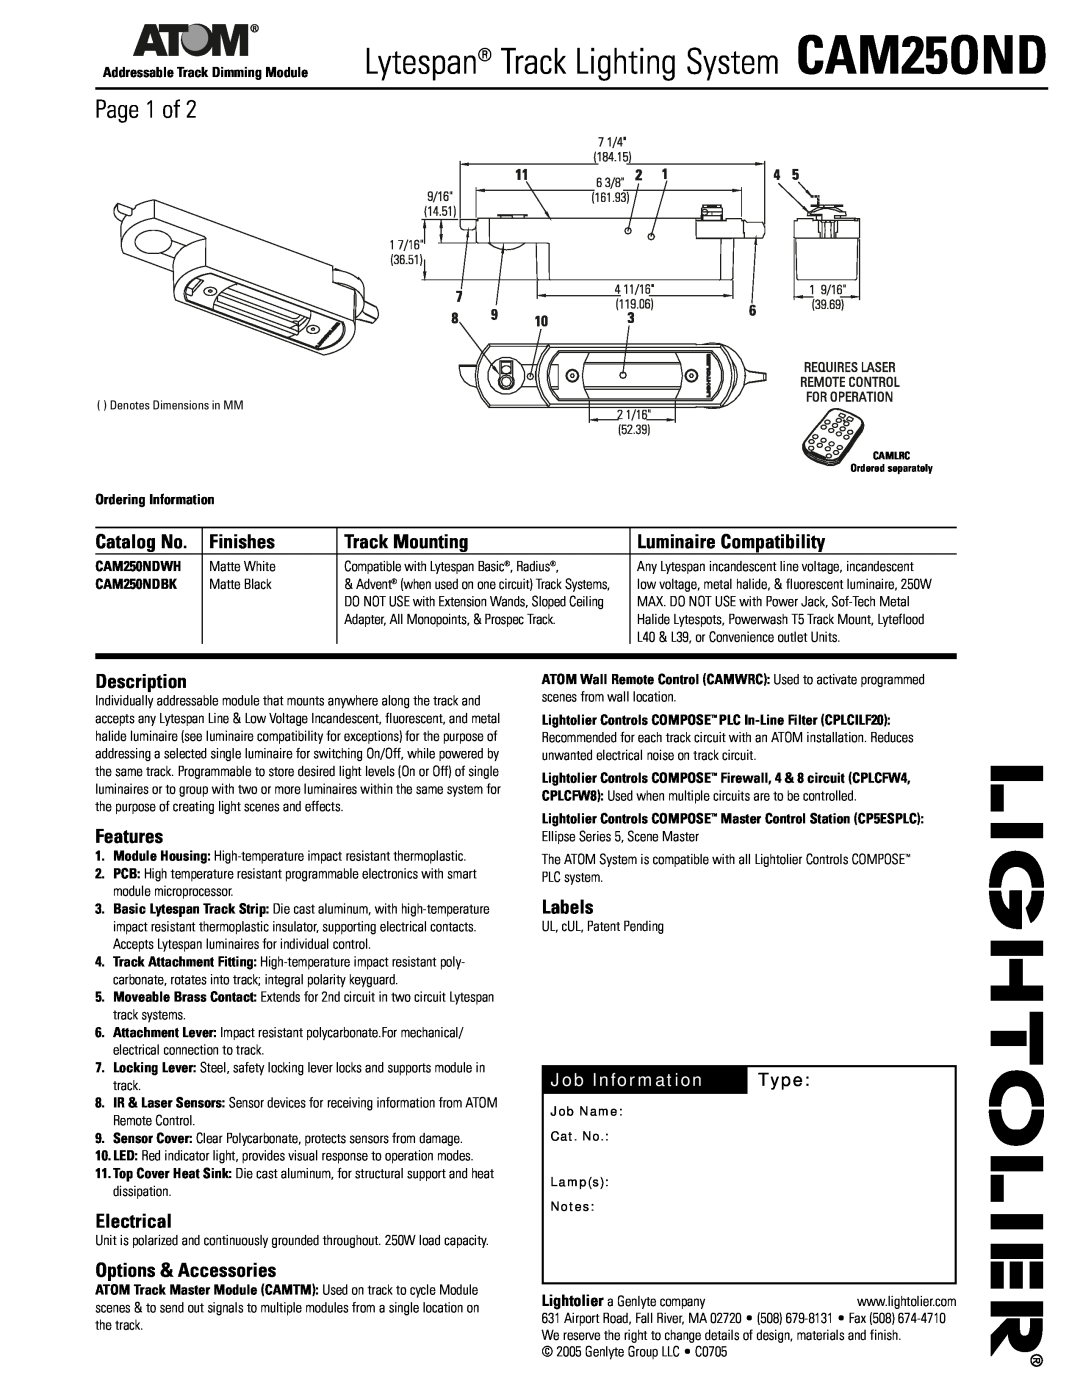 Lightolier CAM250ND dimensions Page 1 of, Finishes, Track Mounting, Luminaire Compatibility, Description, Features, Labels 